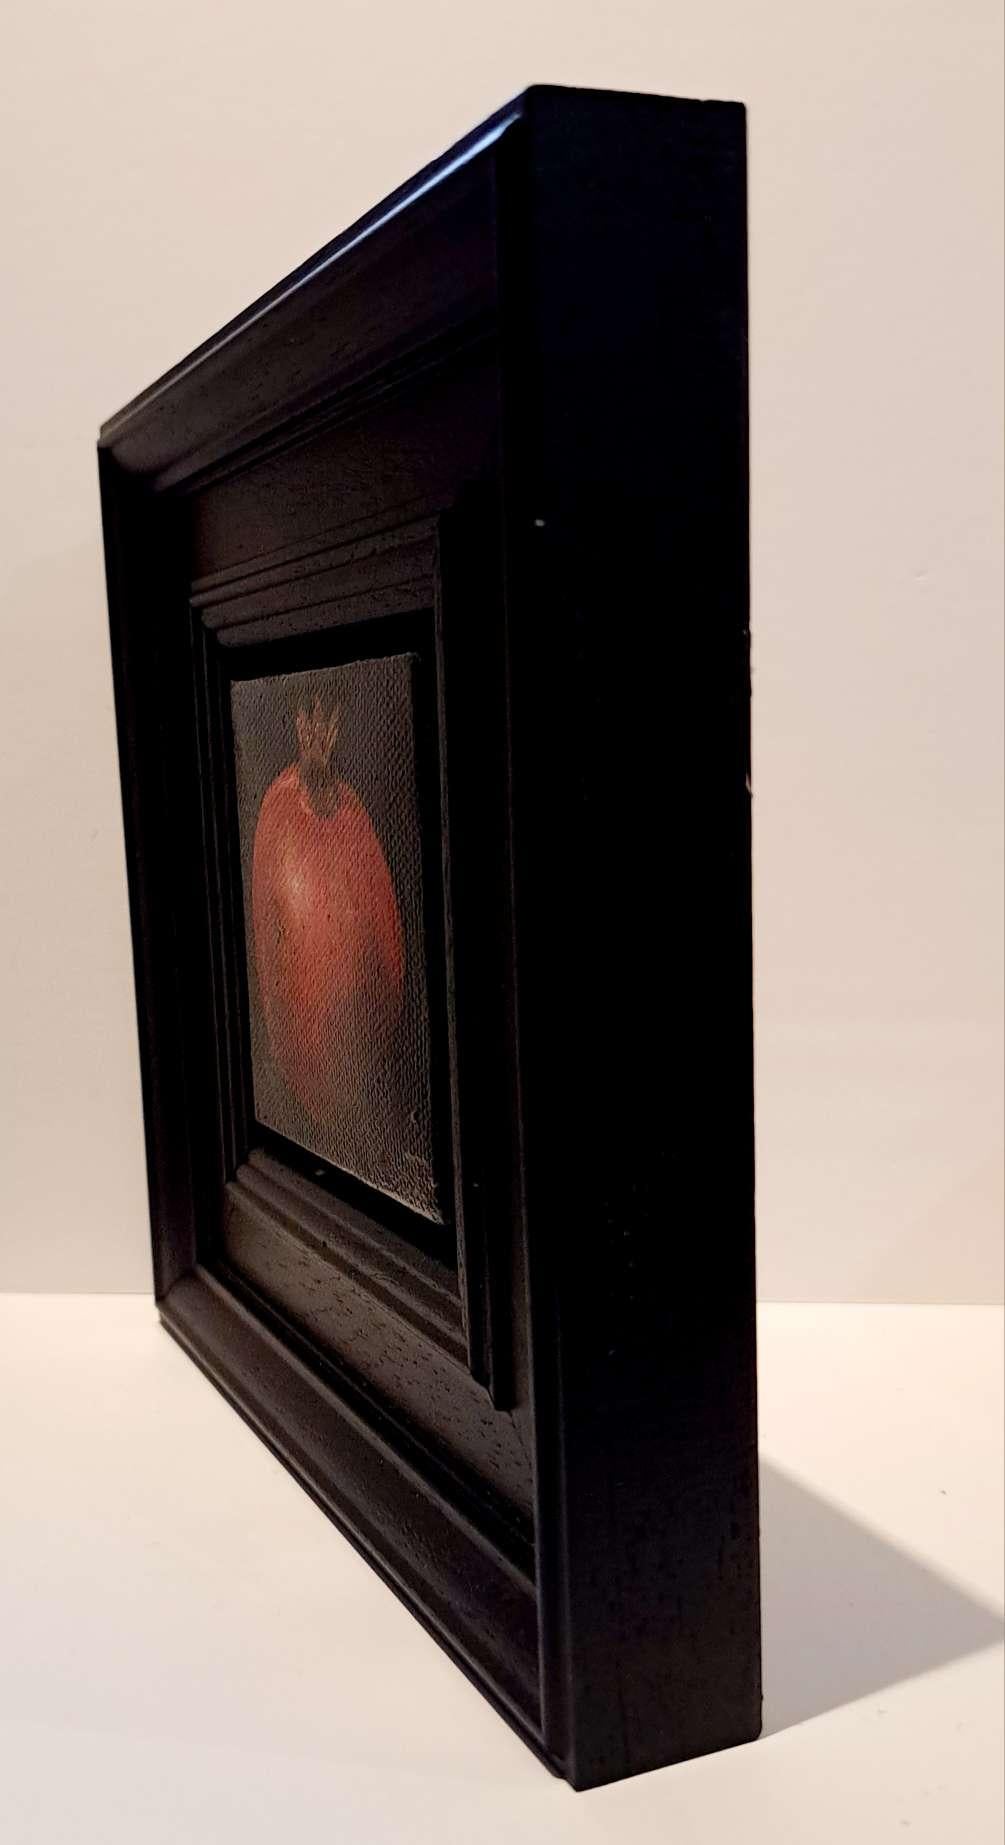 Pocket Ripe Red Pomegranate is an original oil painting by Dani Humberstone as part of her Pocket Painting series featuring small scale realistic oil paintings, with a nod to baroque still life painting. The paintings are set in a black wood layered